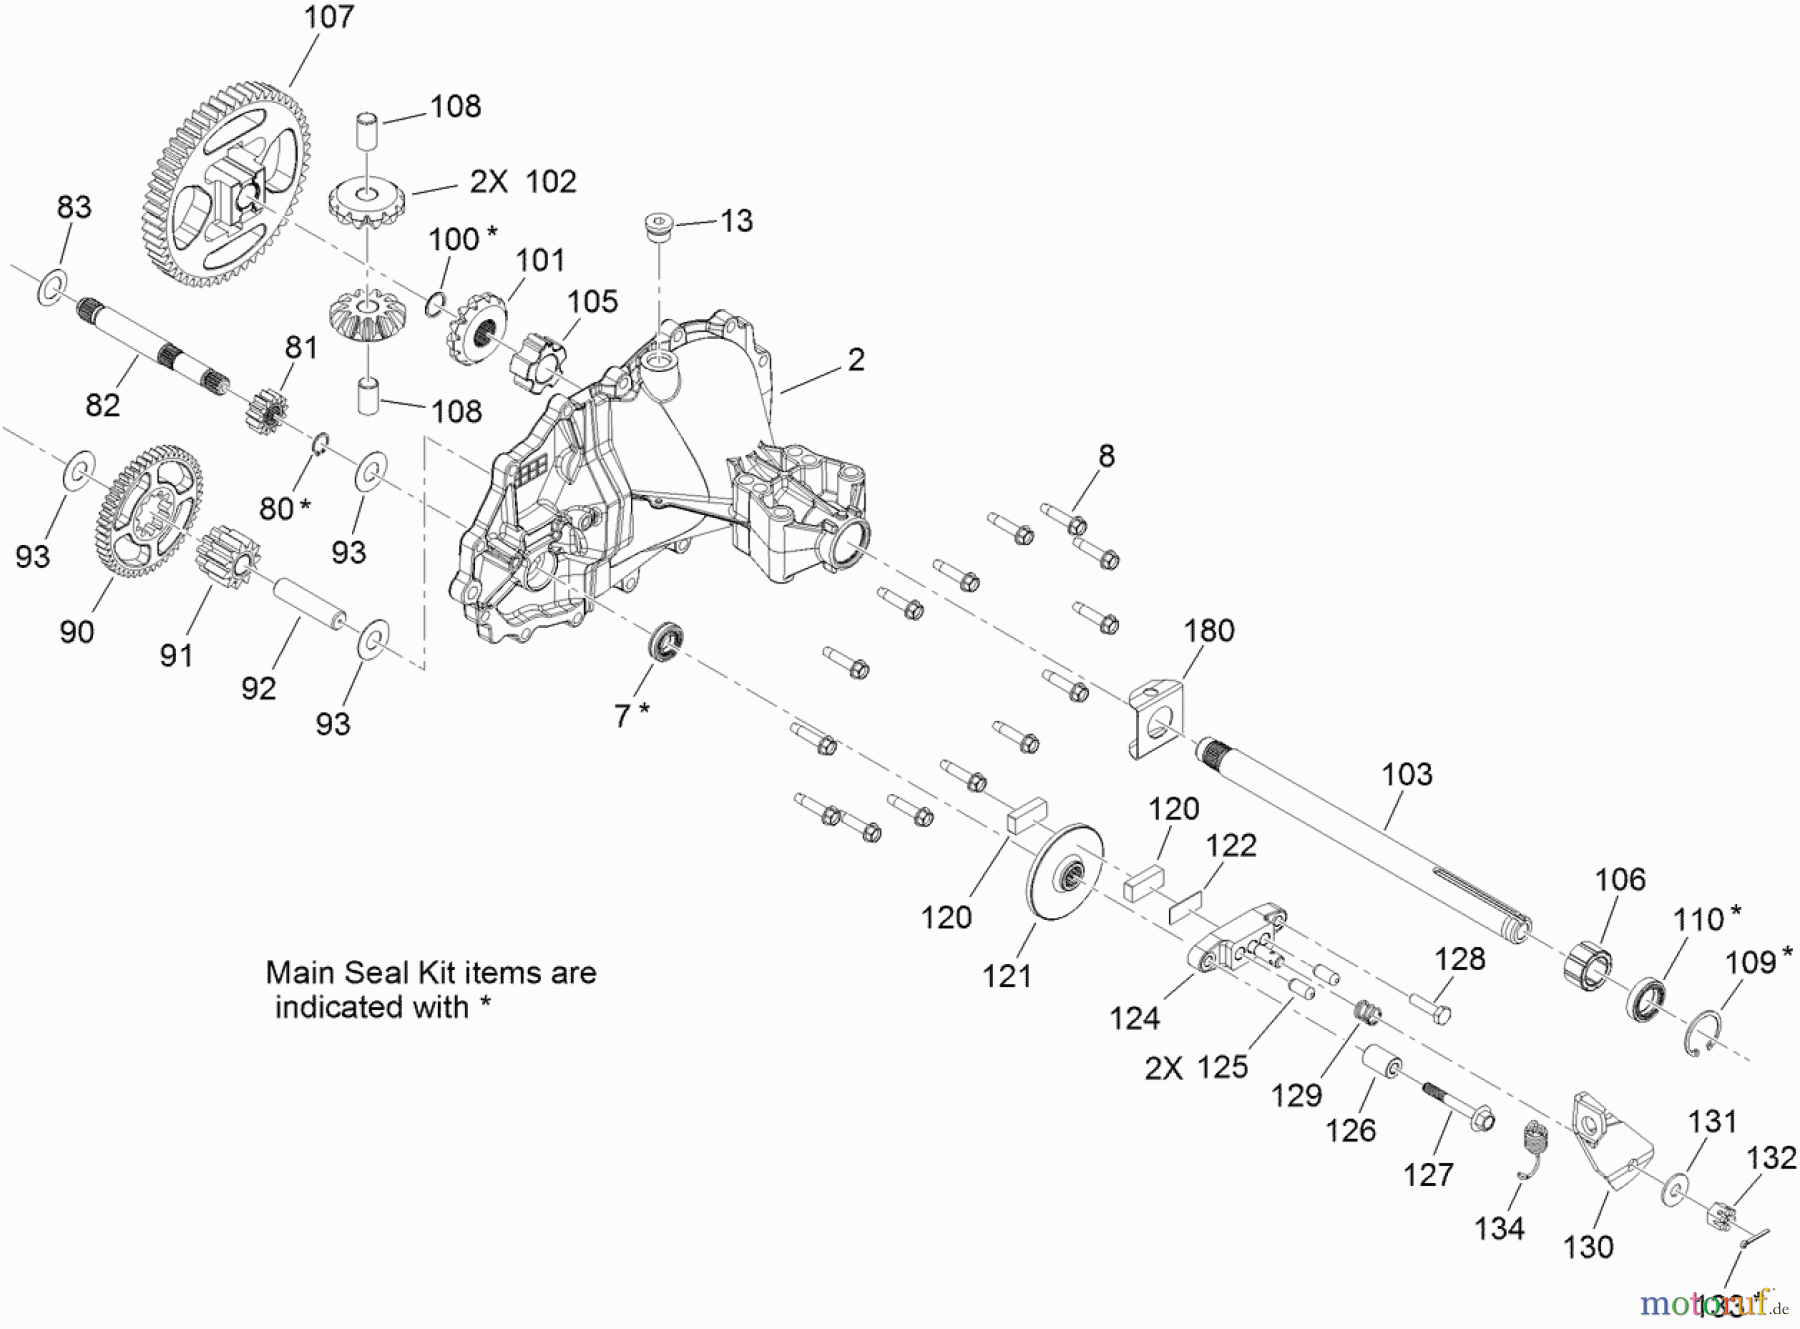  Toro Neu Mowers, Lawn & Garden Tractor Seite 1 74560 (DH 140) - Toro DH 140 Lawn Tractor, 2011 (311000001-311999999) SIDE HOUSING TRANSMISSION ASSEMBLY NO. 121-0999